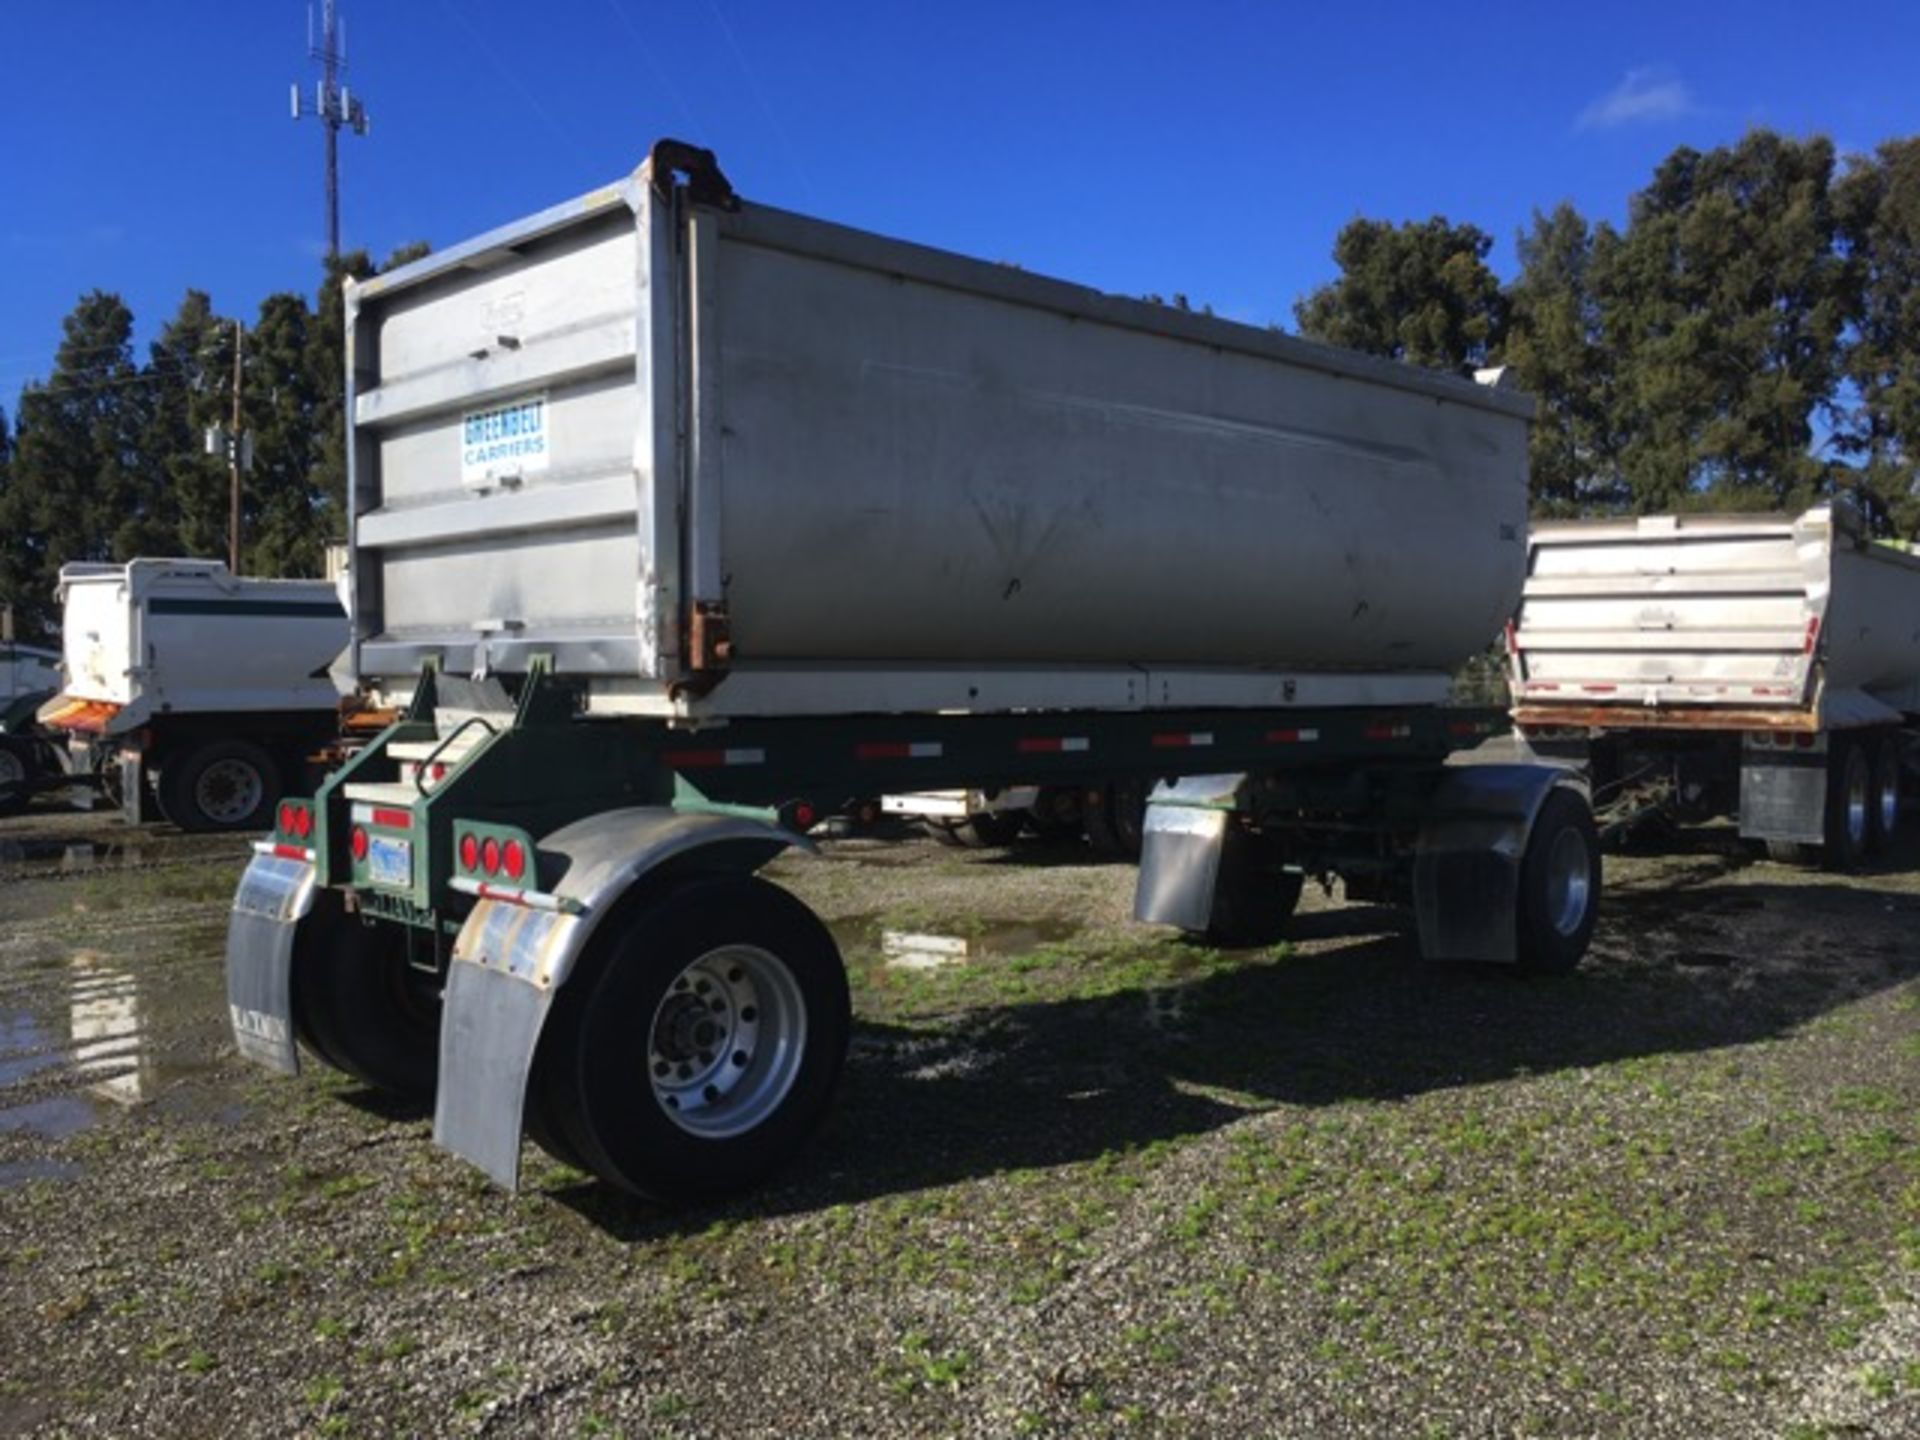 1978 Reliance 18' Transfer Trailer, VIN RRS78527 - Image 2 of 15